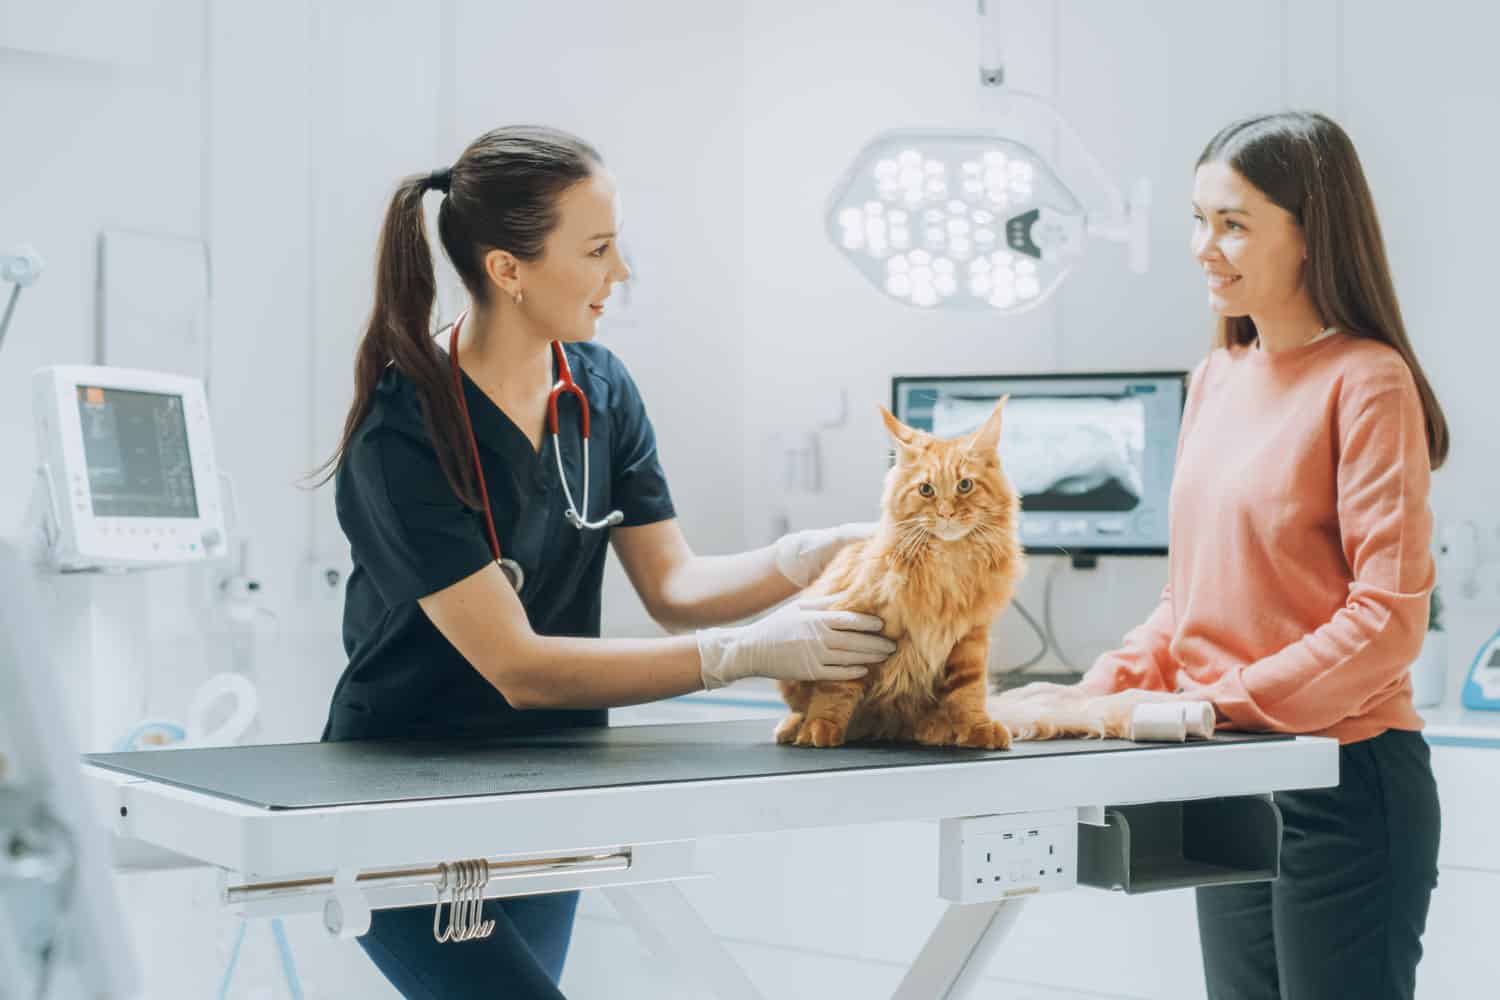 Young Beautiful Female Holding Pet at Doctor's Appointment at a Modern Veterinary Clinic. Red Maine Coon Stands on Examination Table While Female Vet Inspects the Cat
